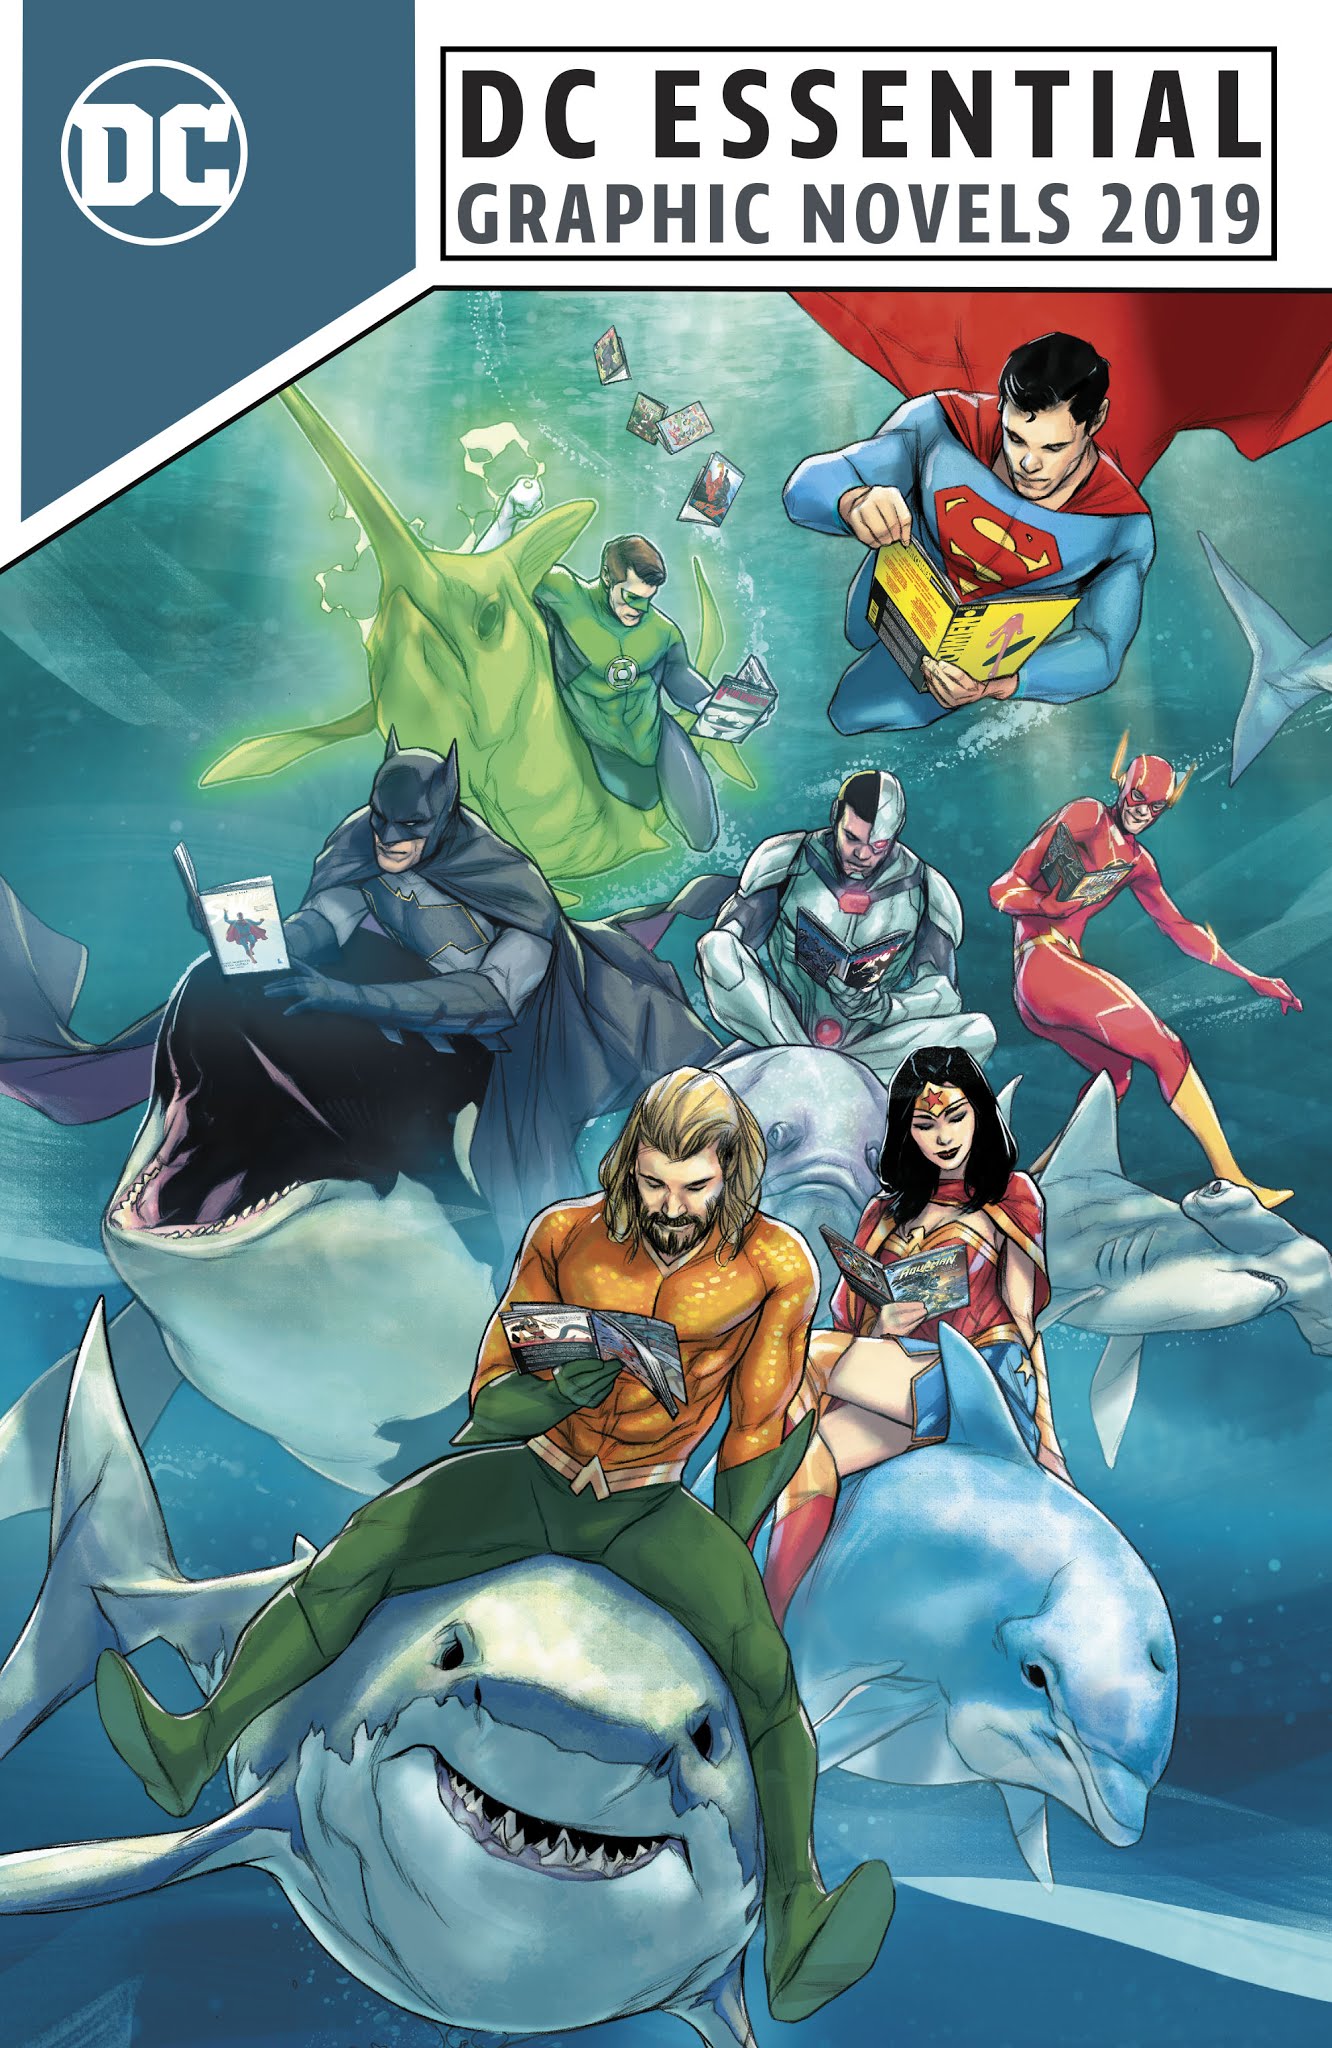 Read online DC Essential Graphic Novels 2019 comic -  Issue # TPB - 1